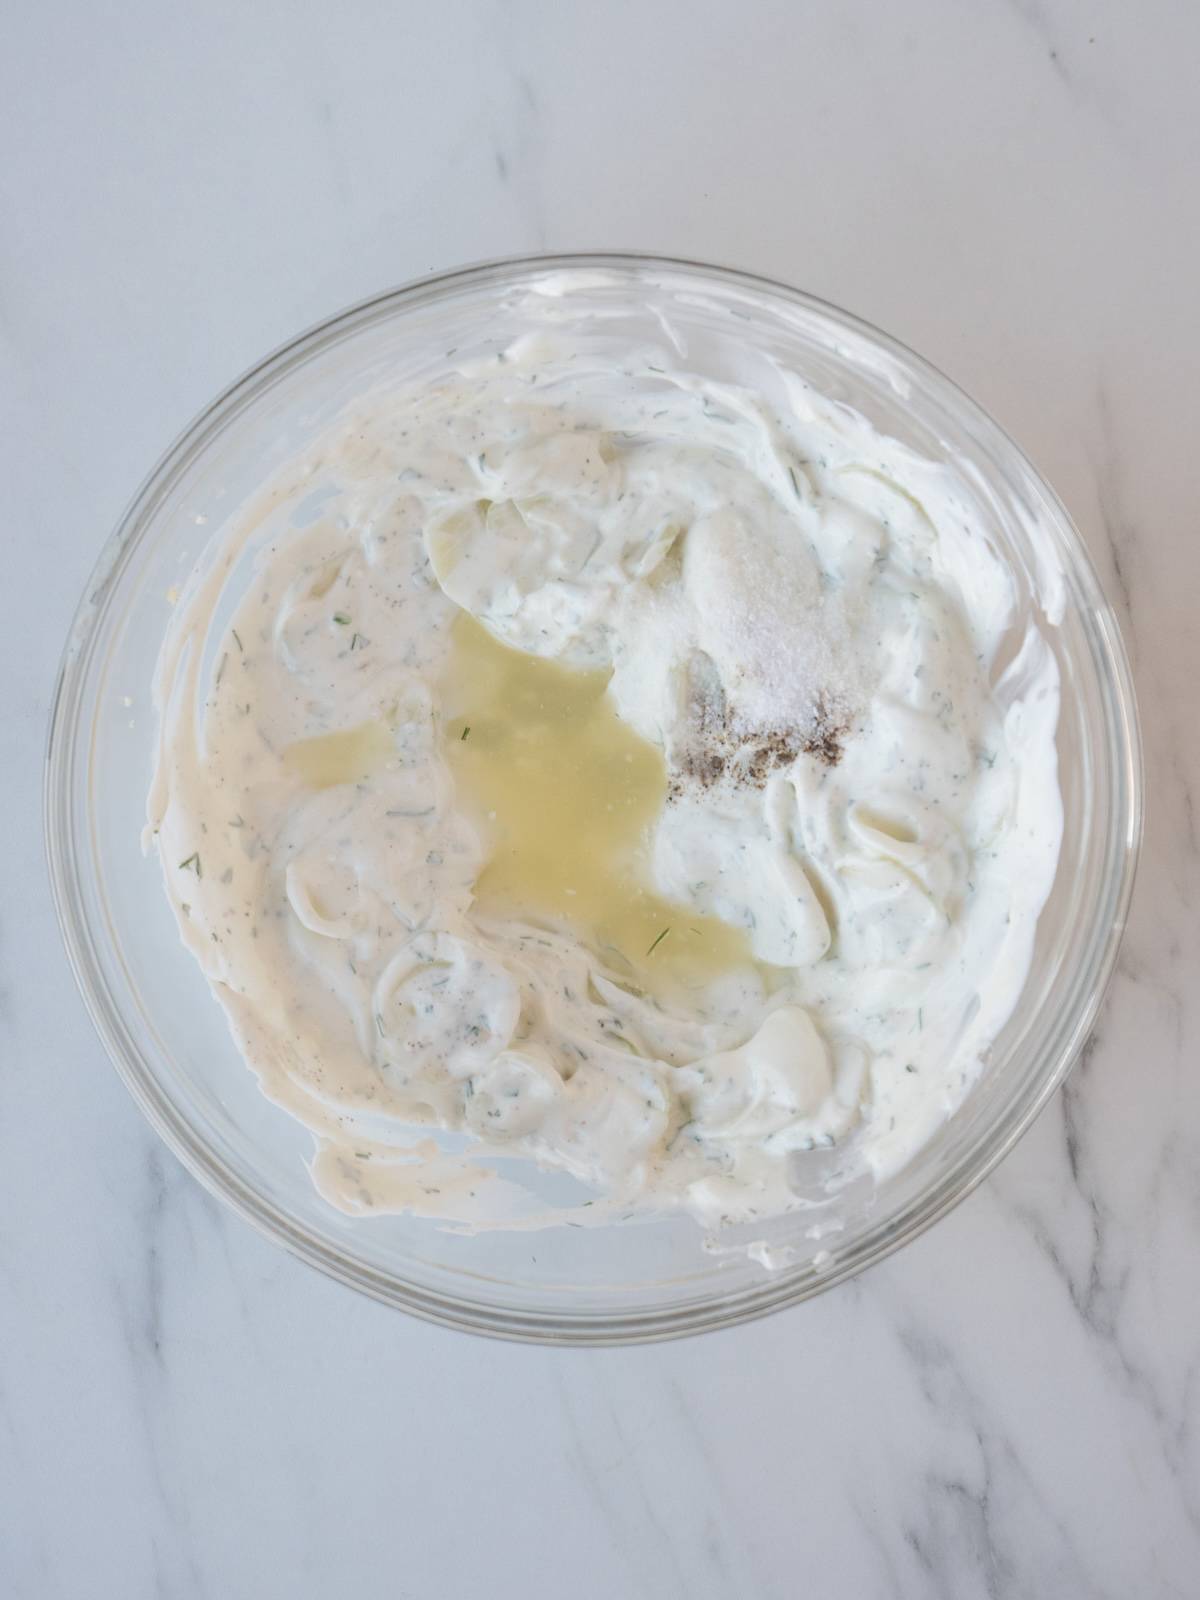 A glass mixing bowl with tzatziki, topped with lemon juice.